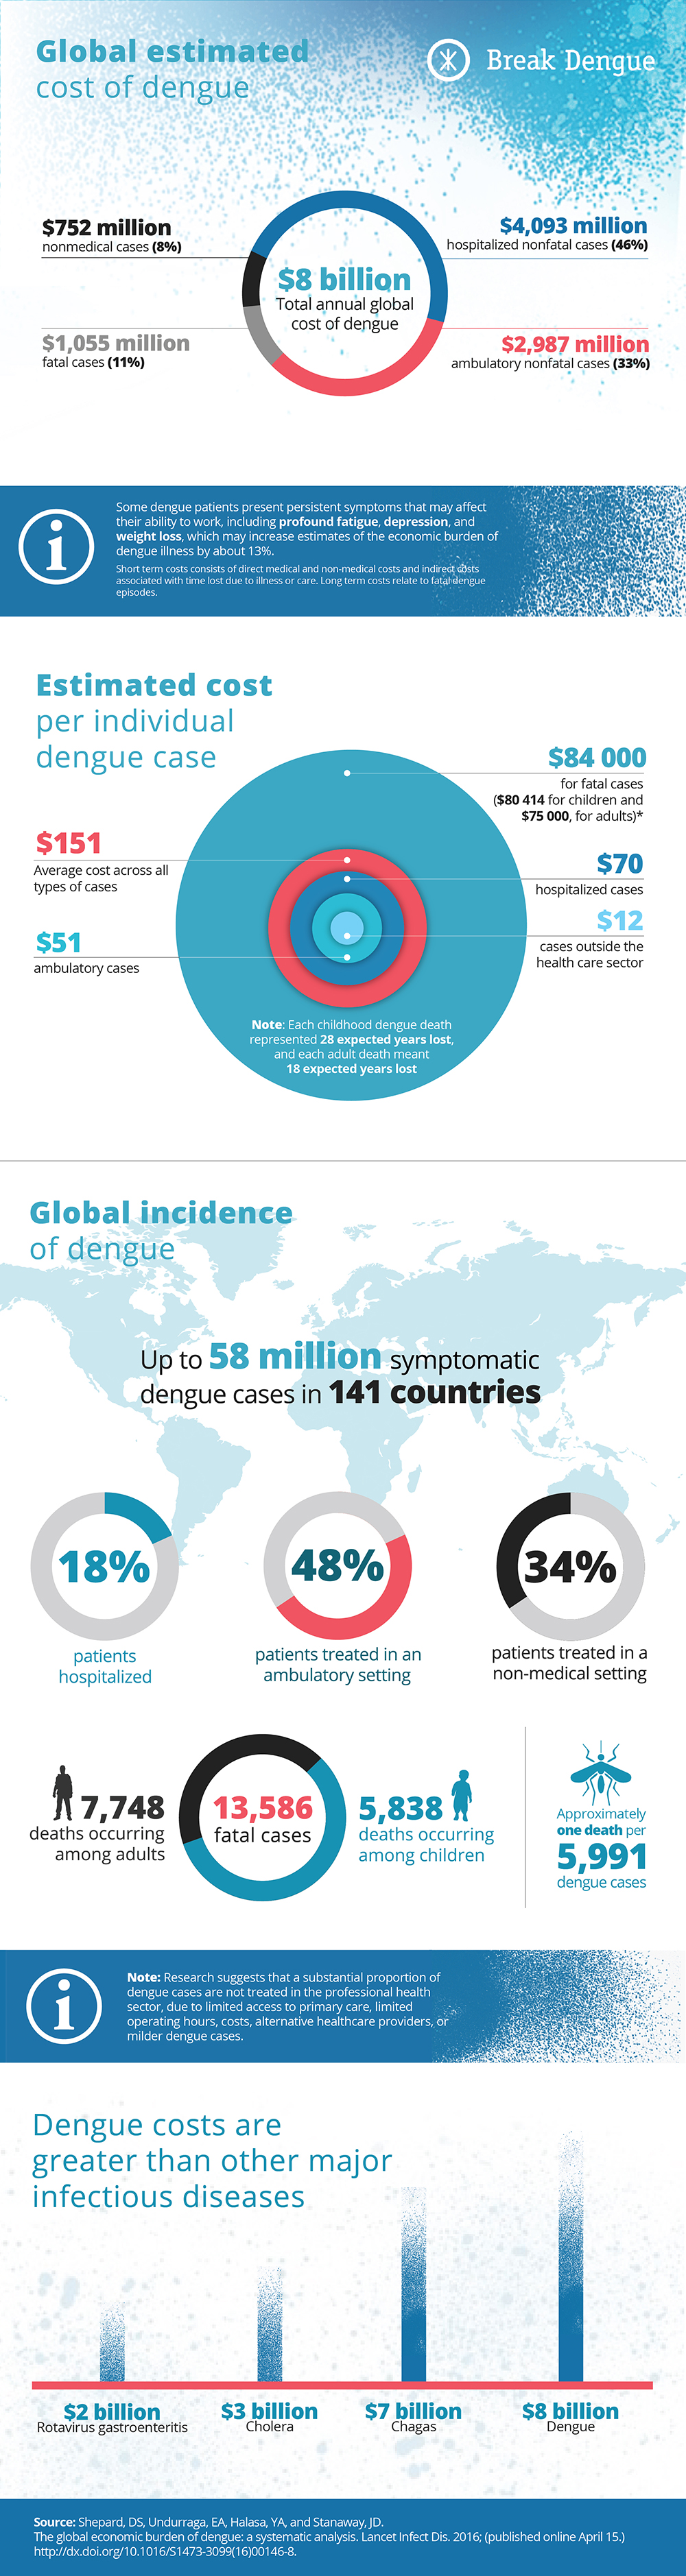 Infographic on global economic cost of dengue